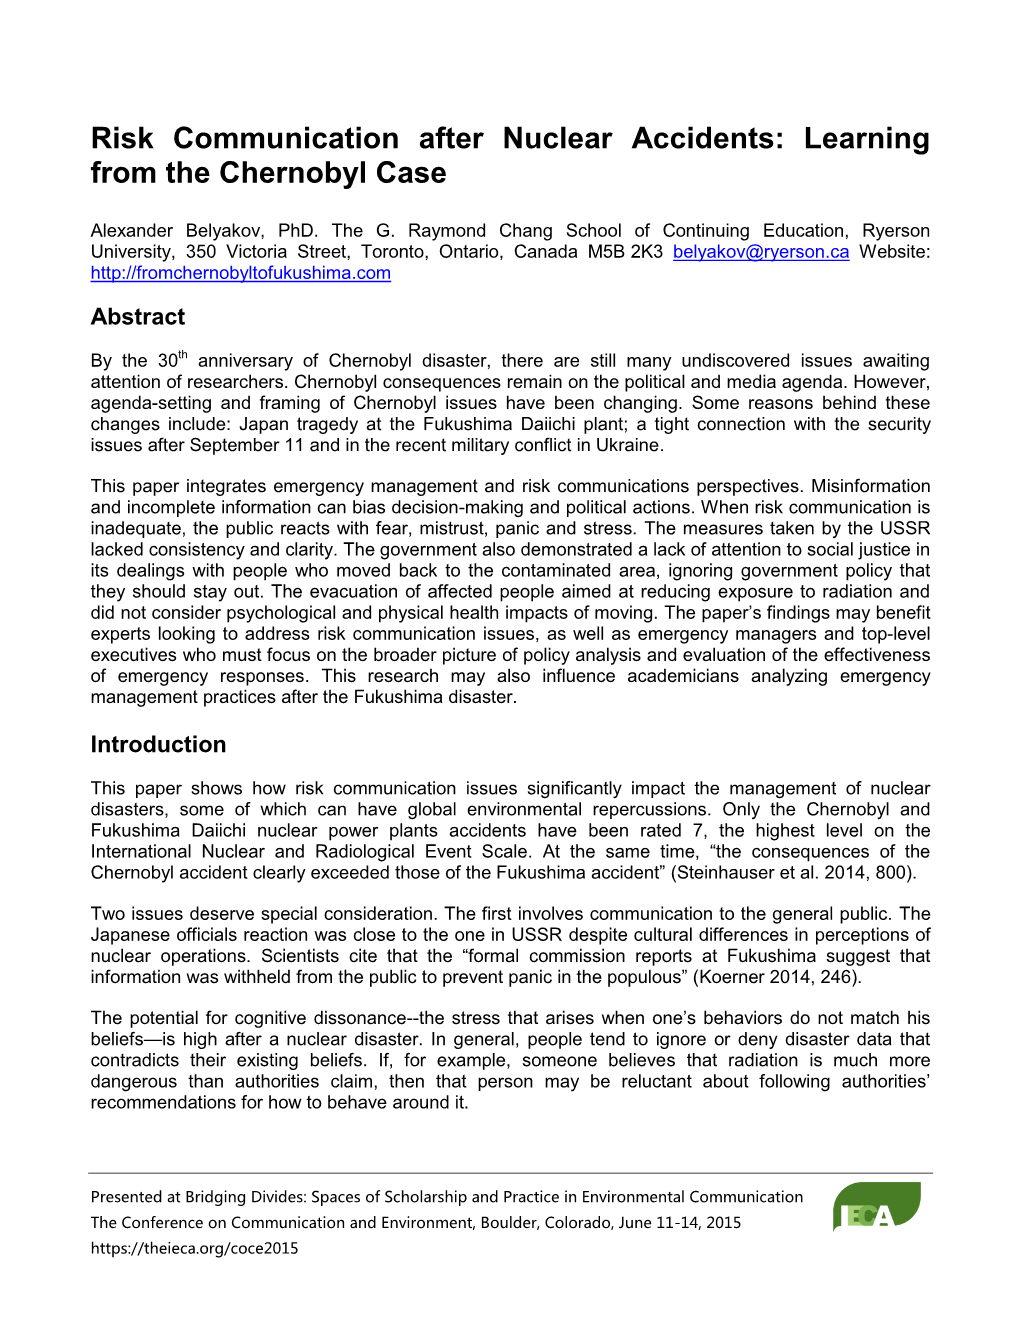 Risk Communication After Nuclear Accidents: Learning from the Chernobyl Case